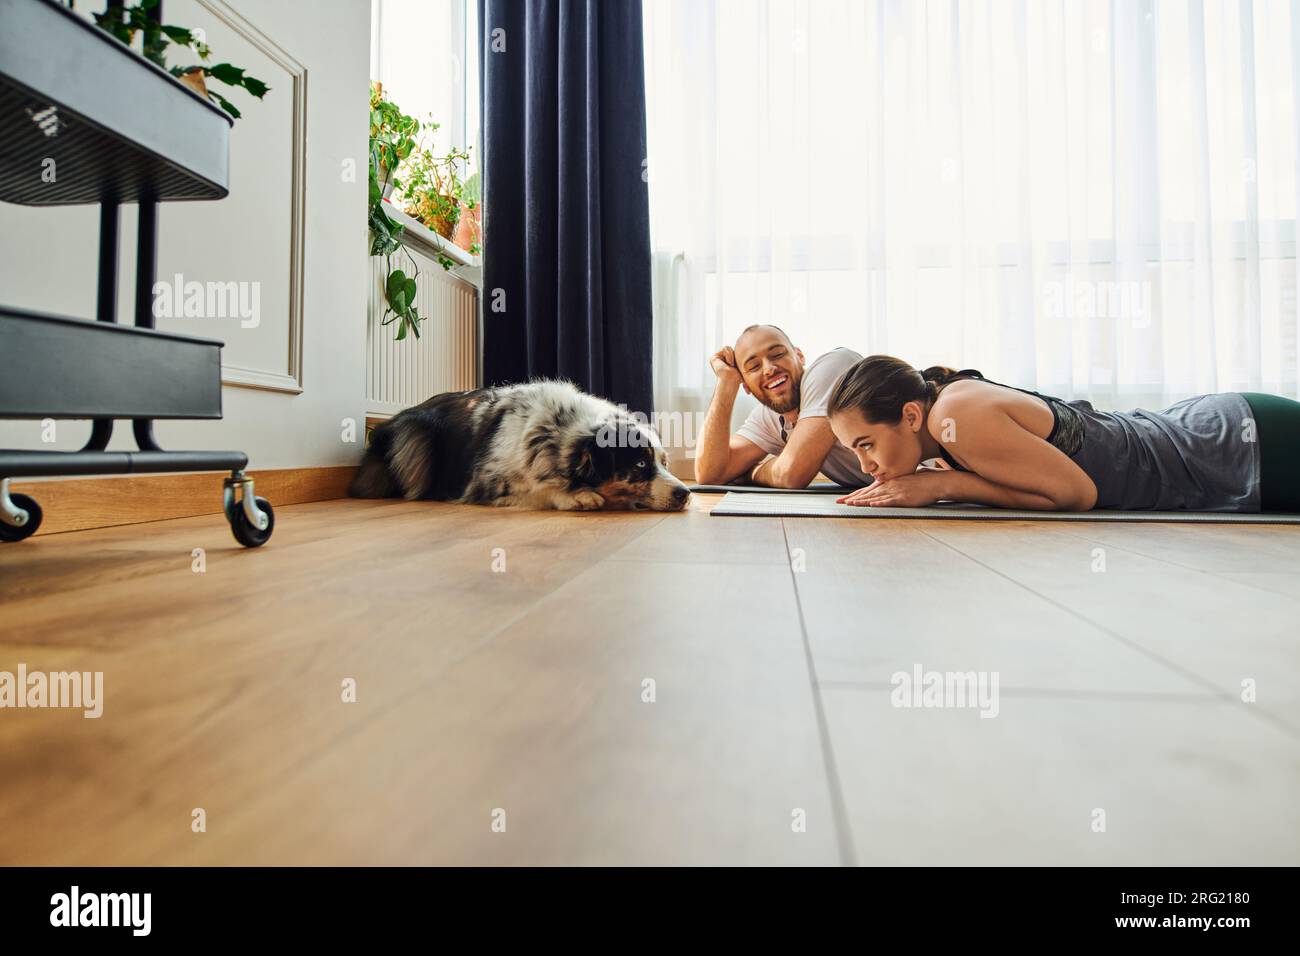 Smiling man in sportswear looking at girlfriend and border collie while lying on fitness mat at home Stock Photo